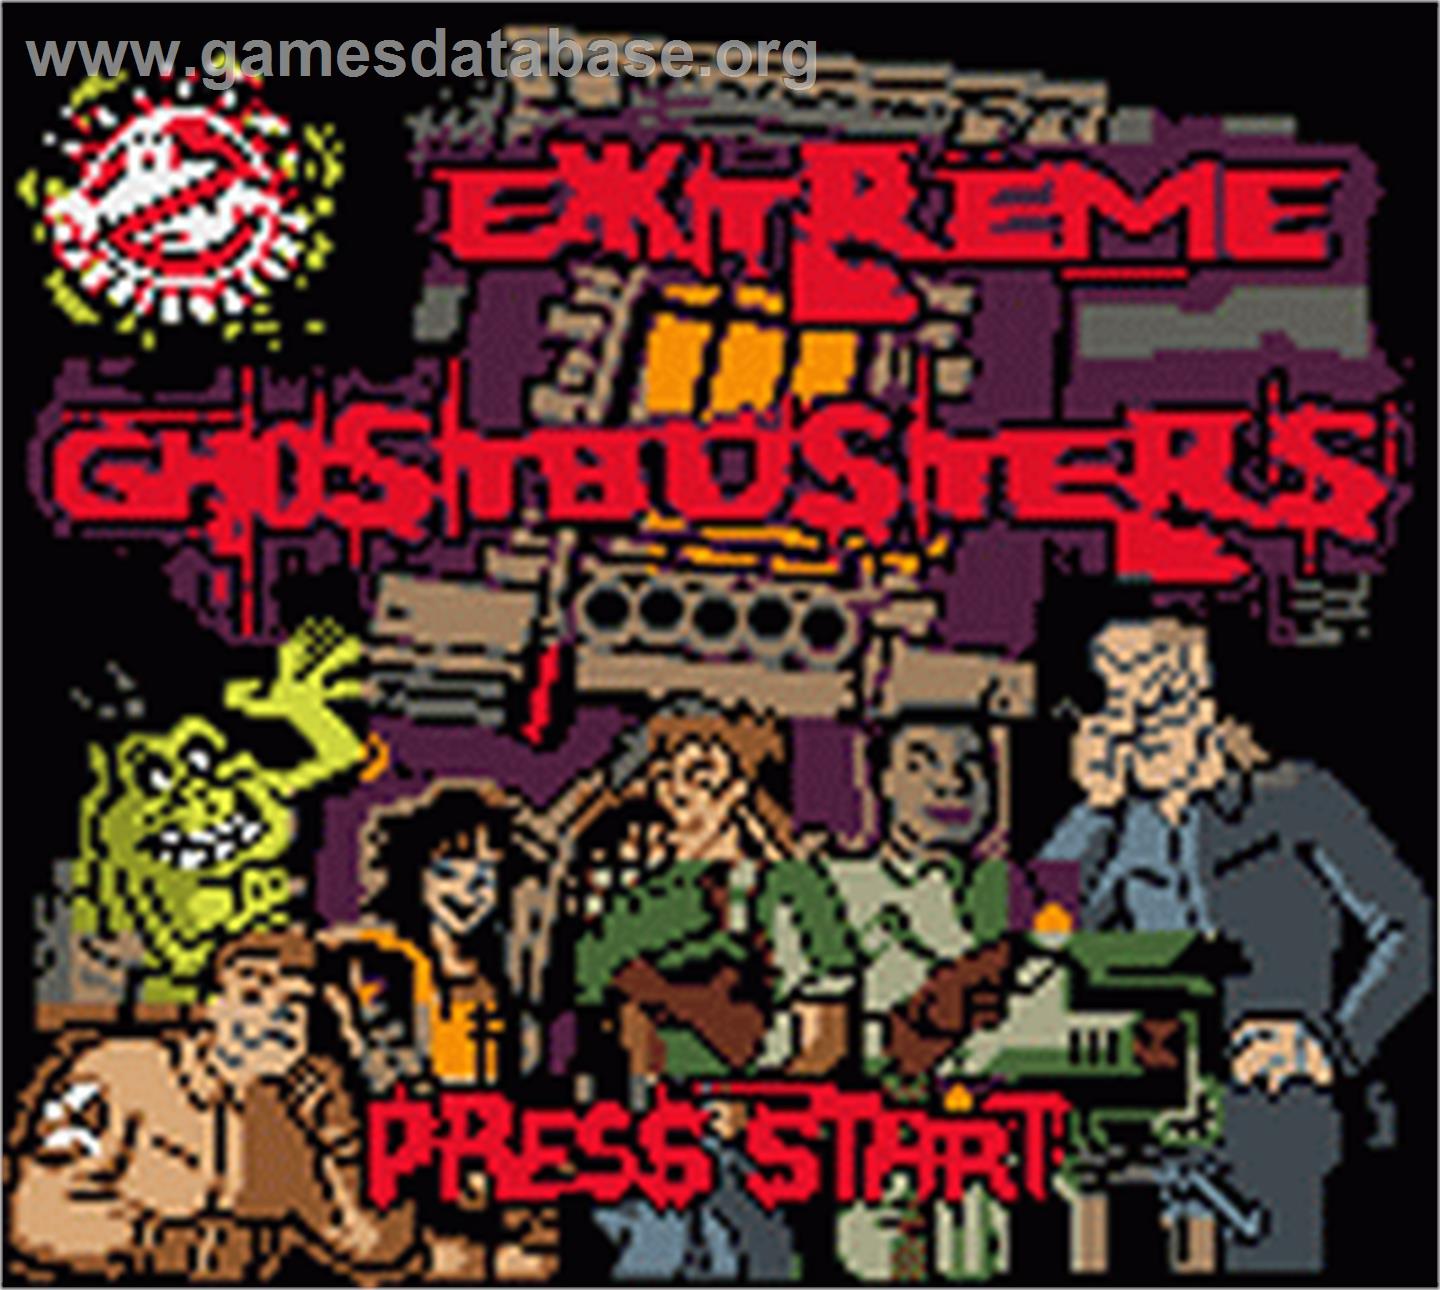 Extreme Ghostbusters - Nintendo Game Boy Color - Artwork - Title Screen